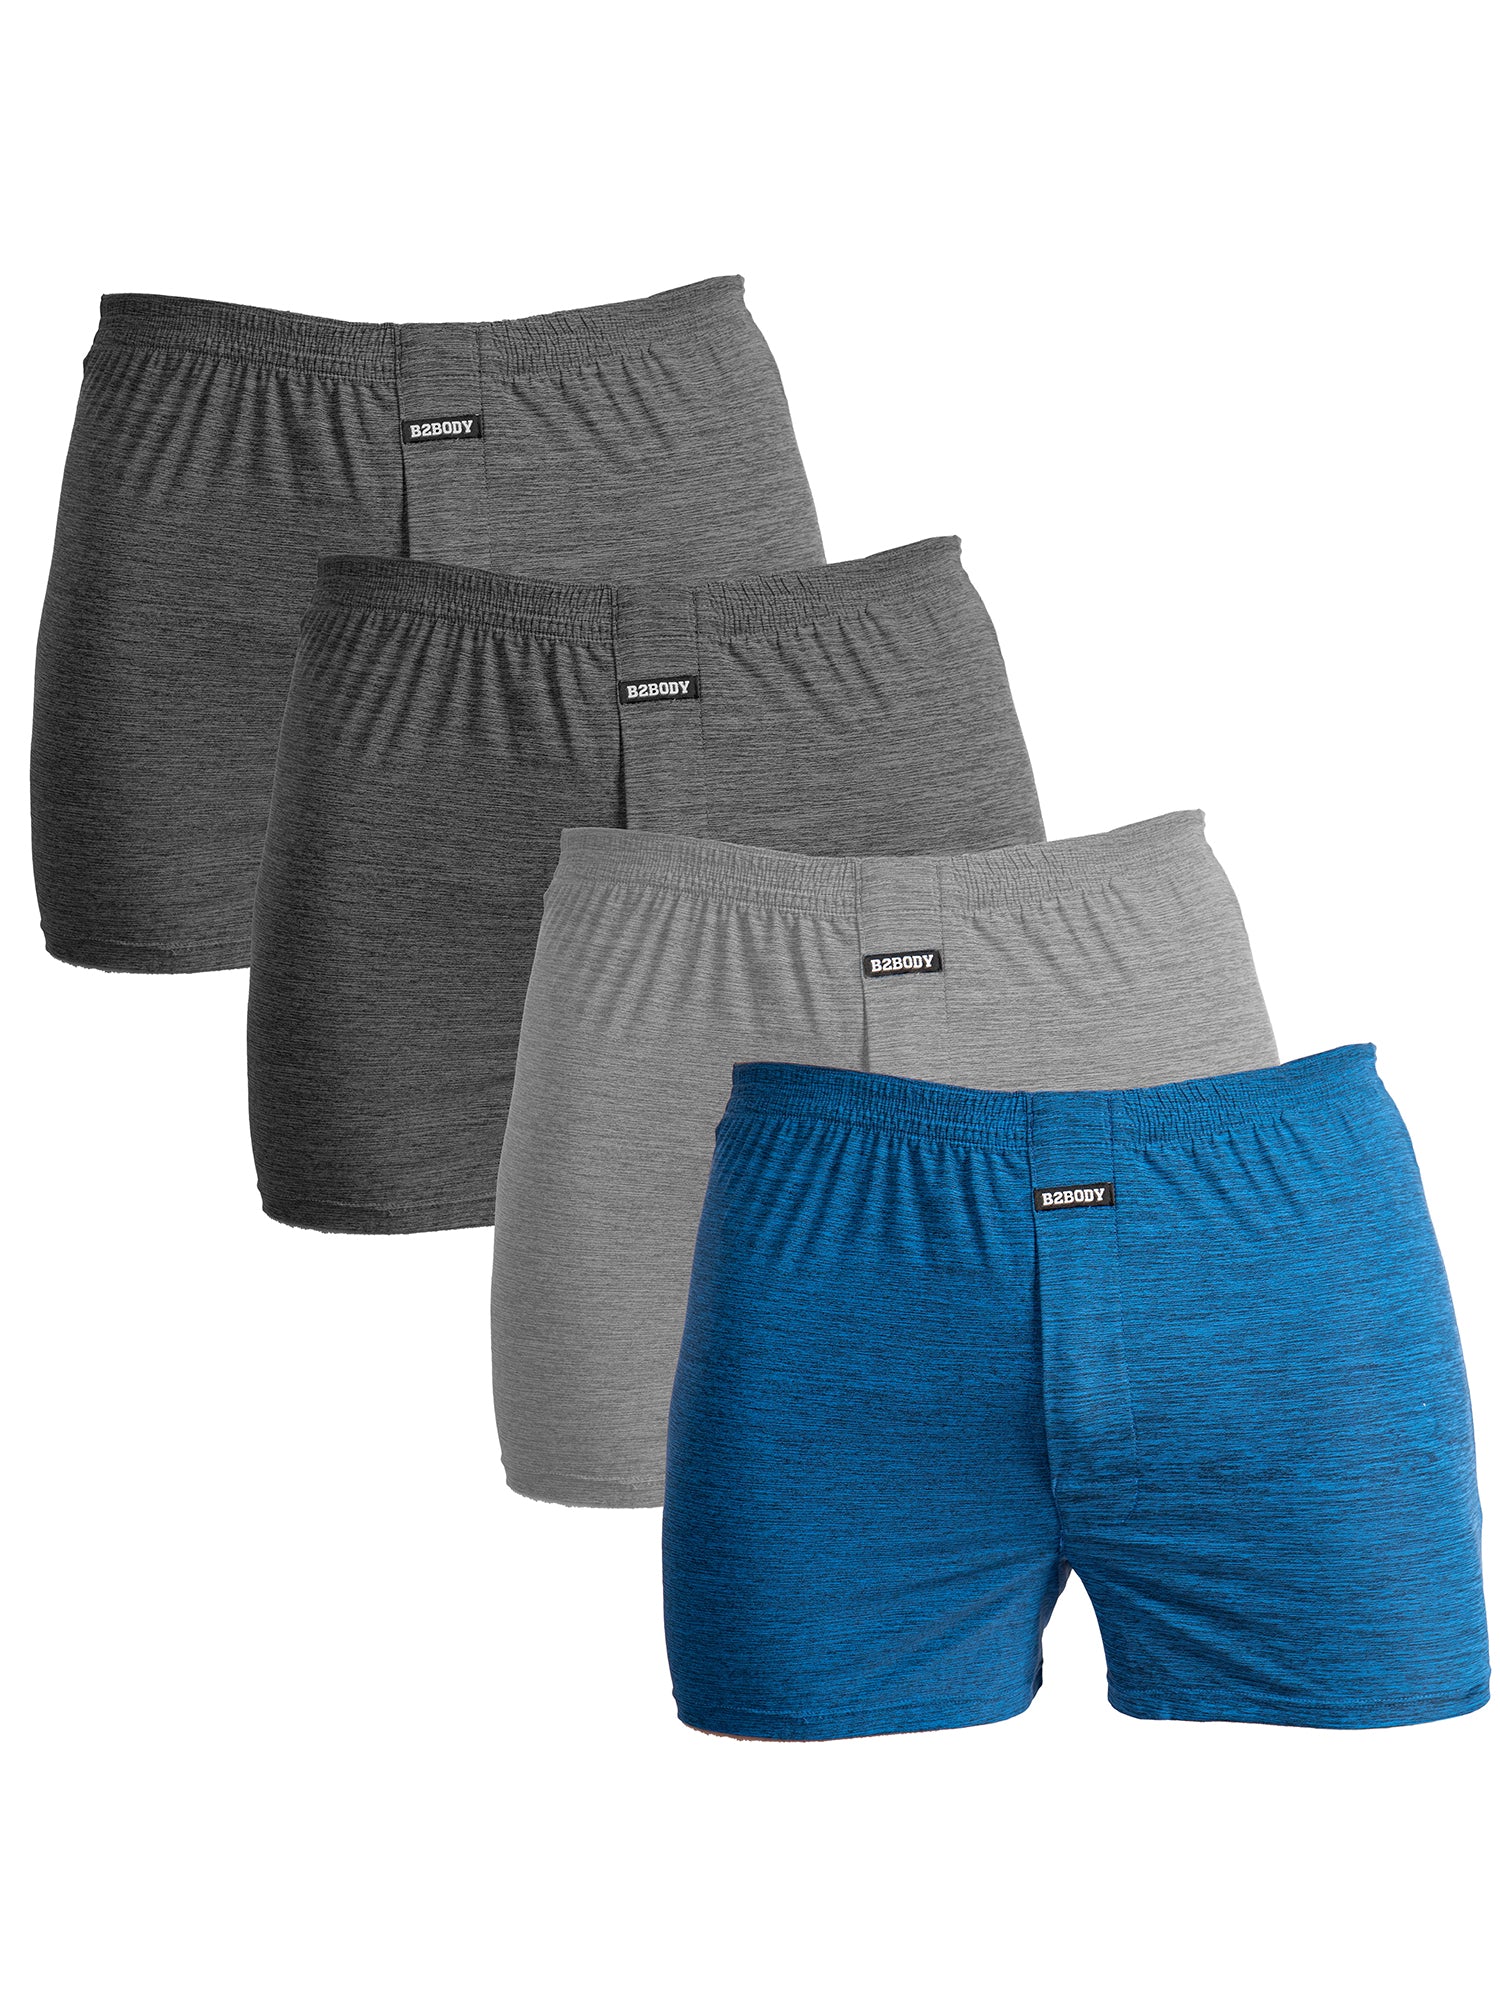 B2BODY Breathable Boxers with Soft Comfort Waistband for Men Small